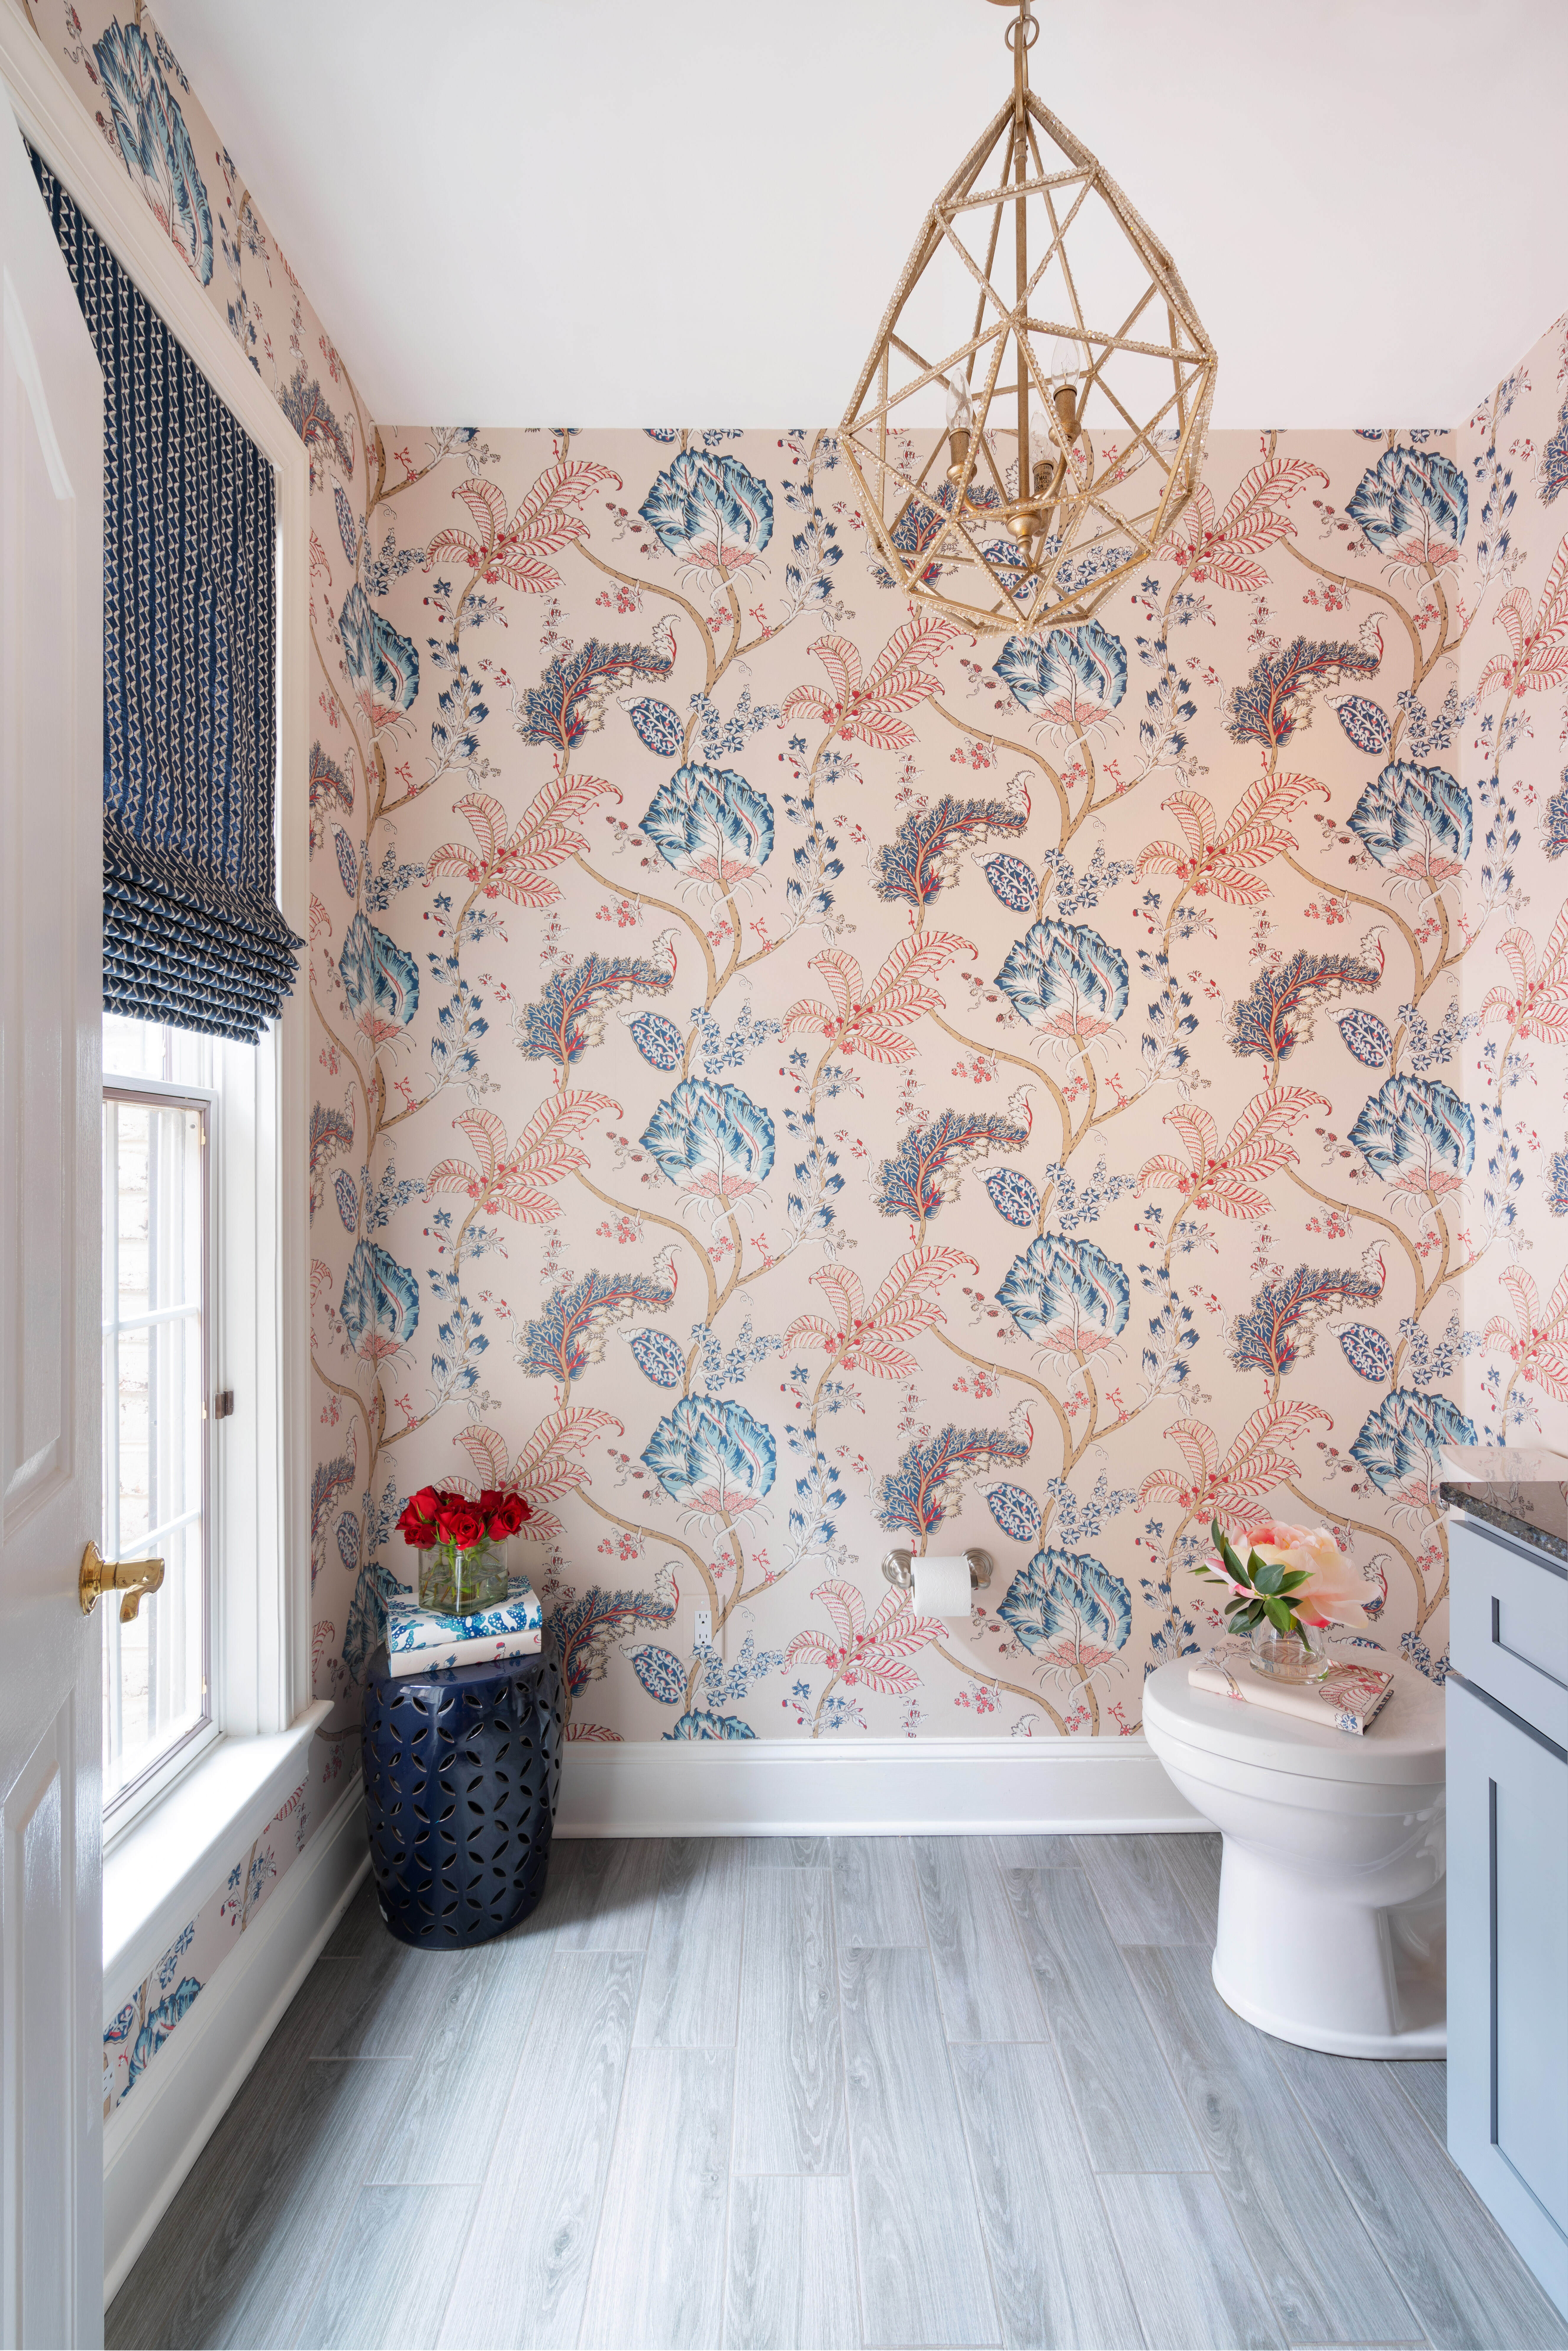 Updated Powder Room with Floral Wallpaper, Custom Navy Drapery and Crystal Light Fixture